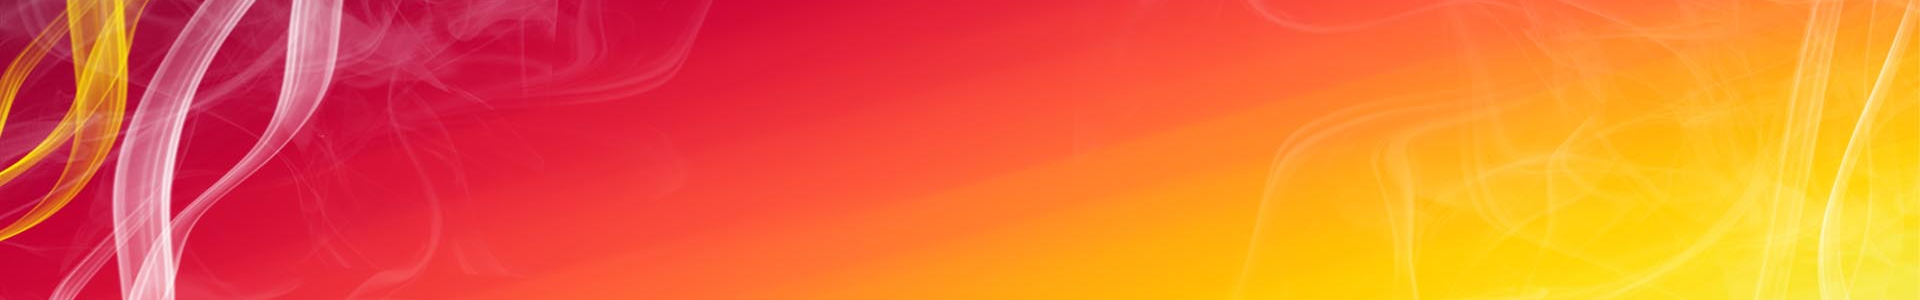 —Pngtree—colorful banner red and yellow_1176793